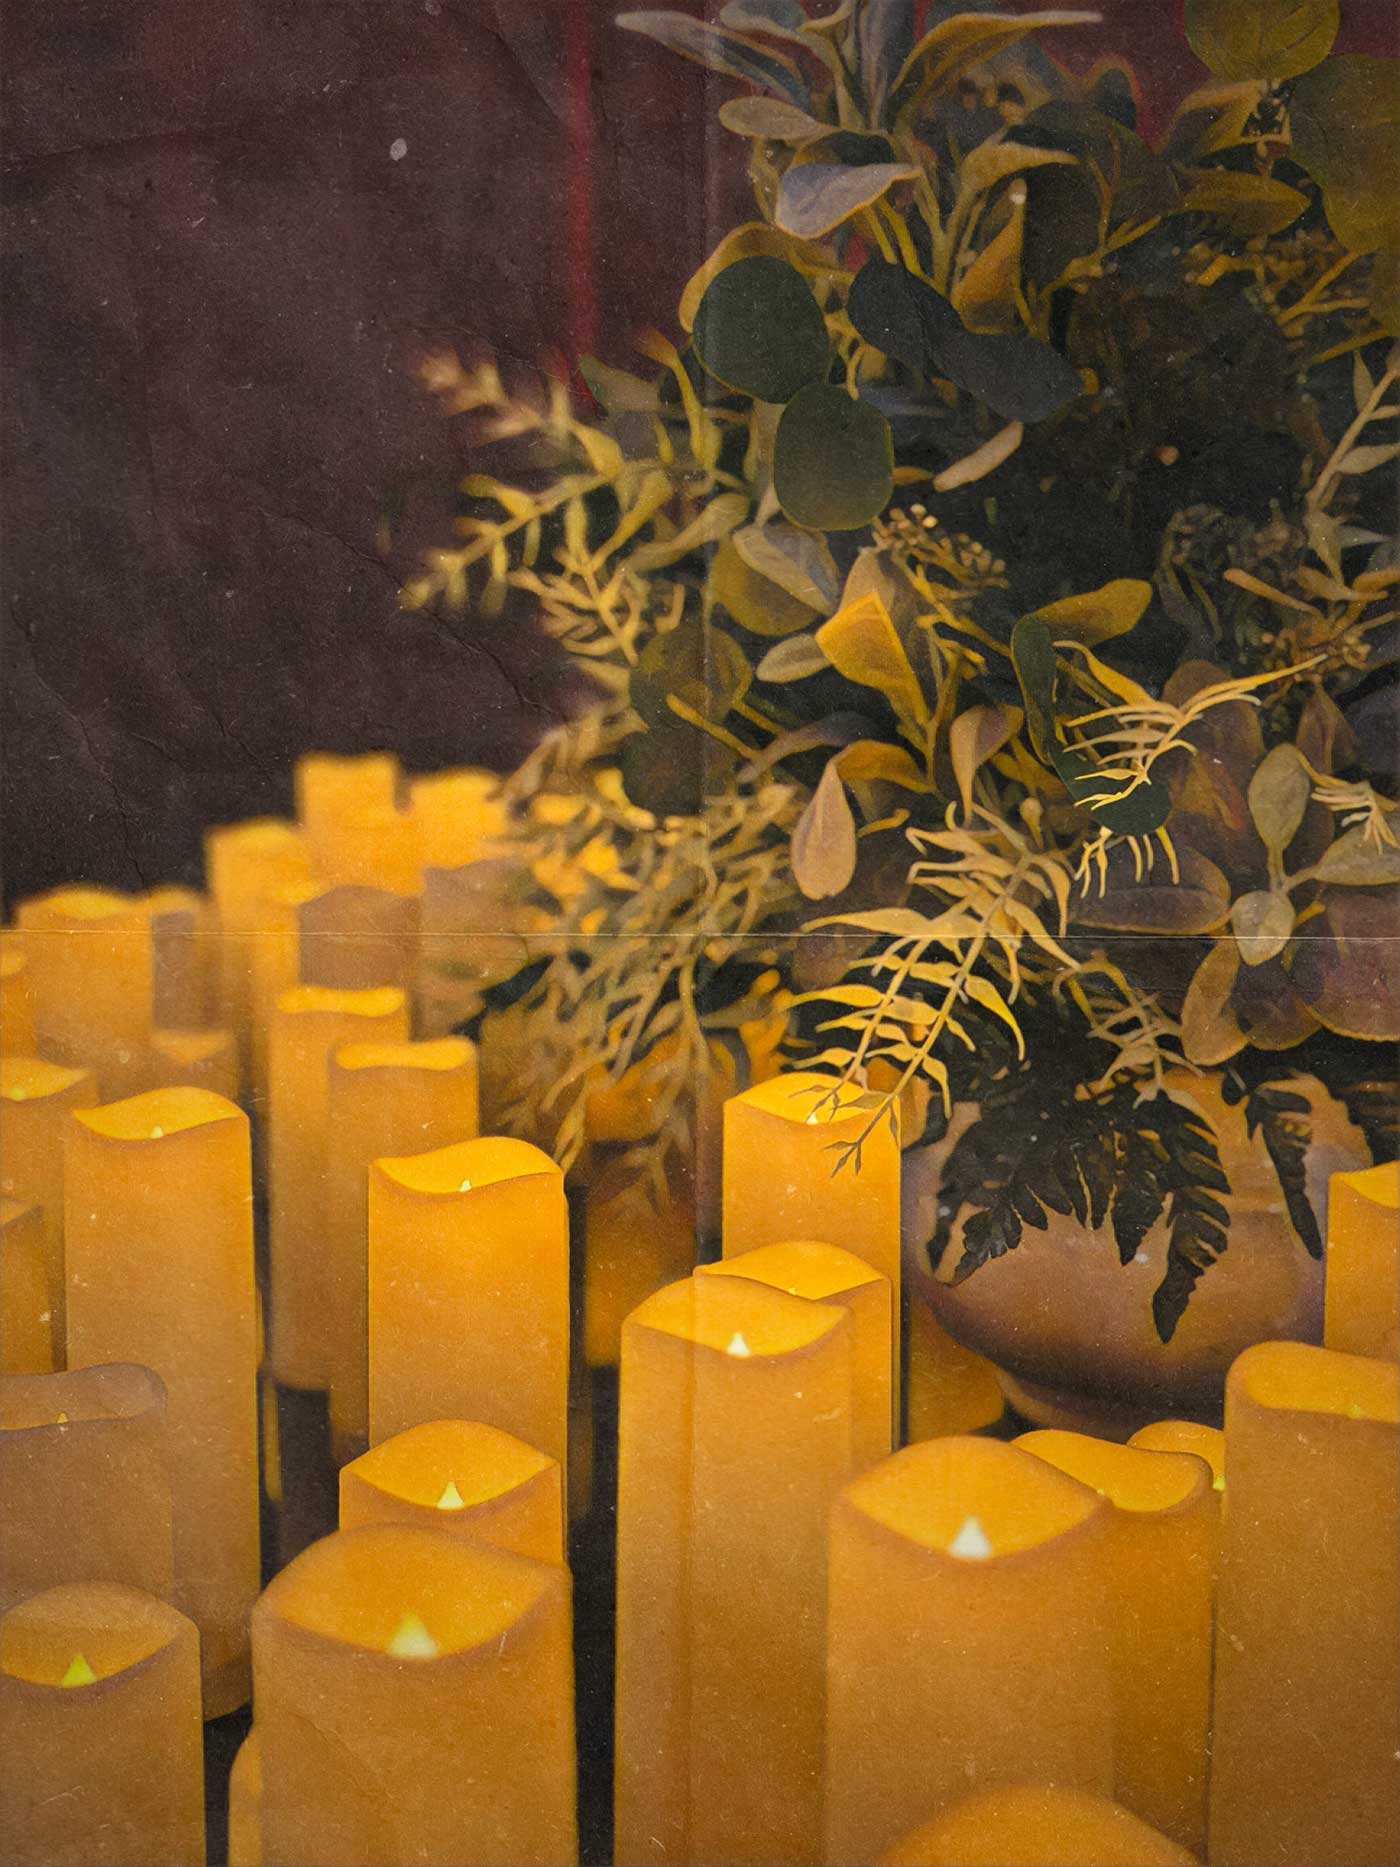 Flameless Candles and Greenery